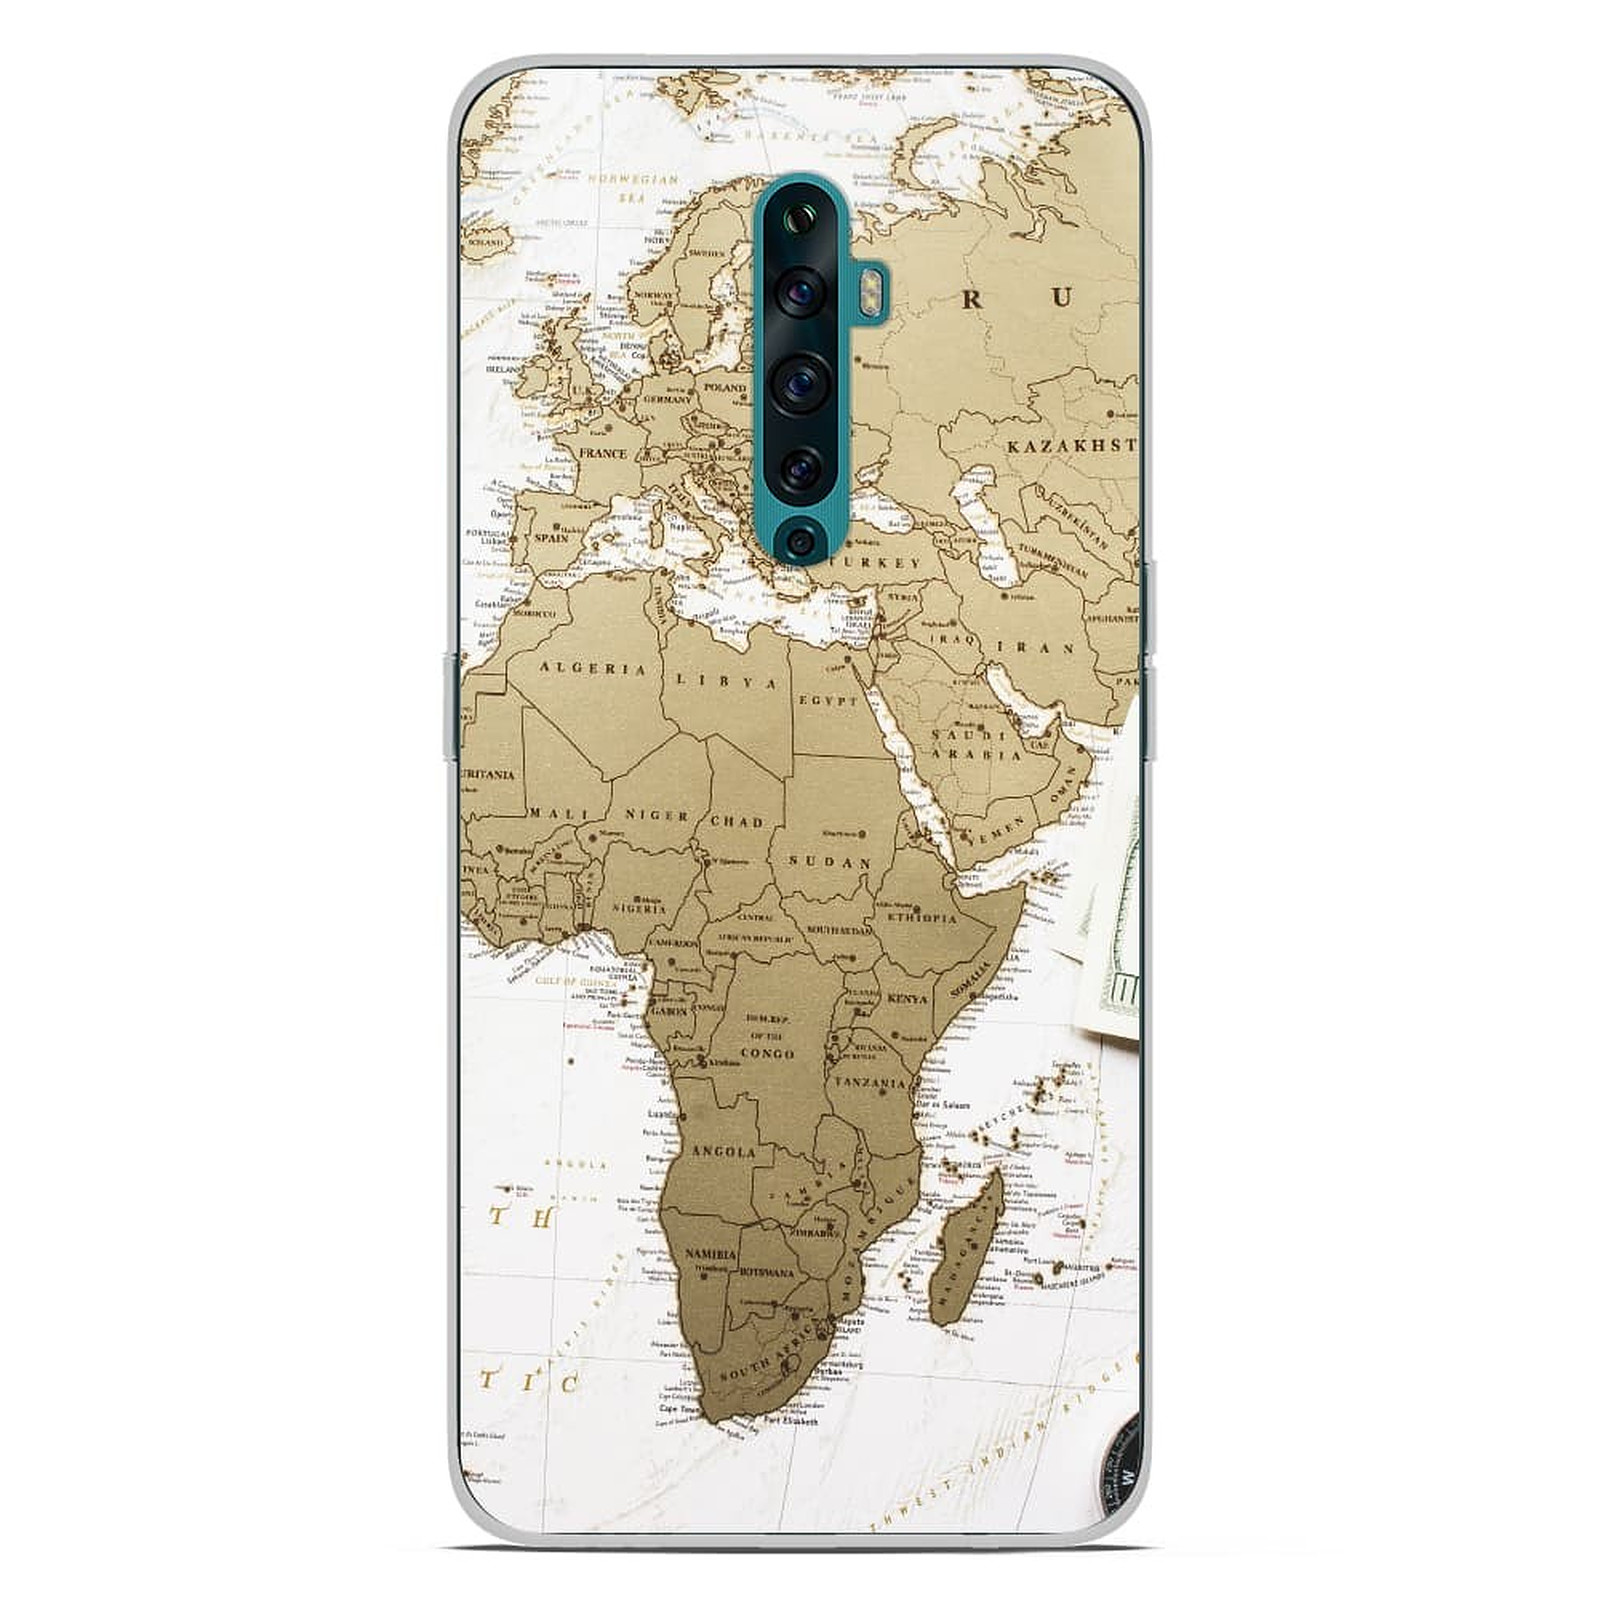 1001 Coques Coque silicone gel Oppo Reno 2Z motif Map Europe Afrique - Coque telephone 1001Coques